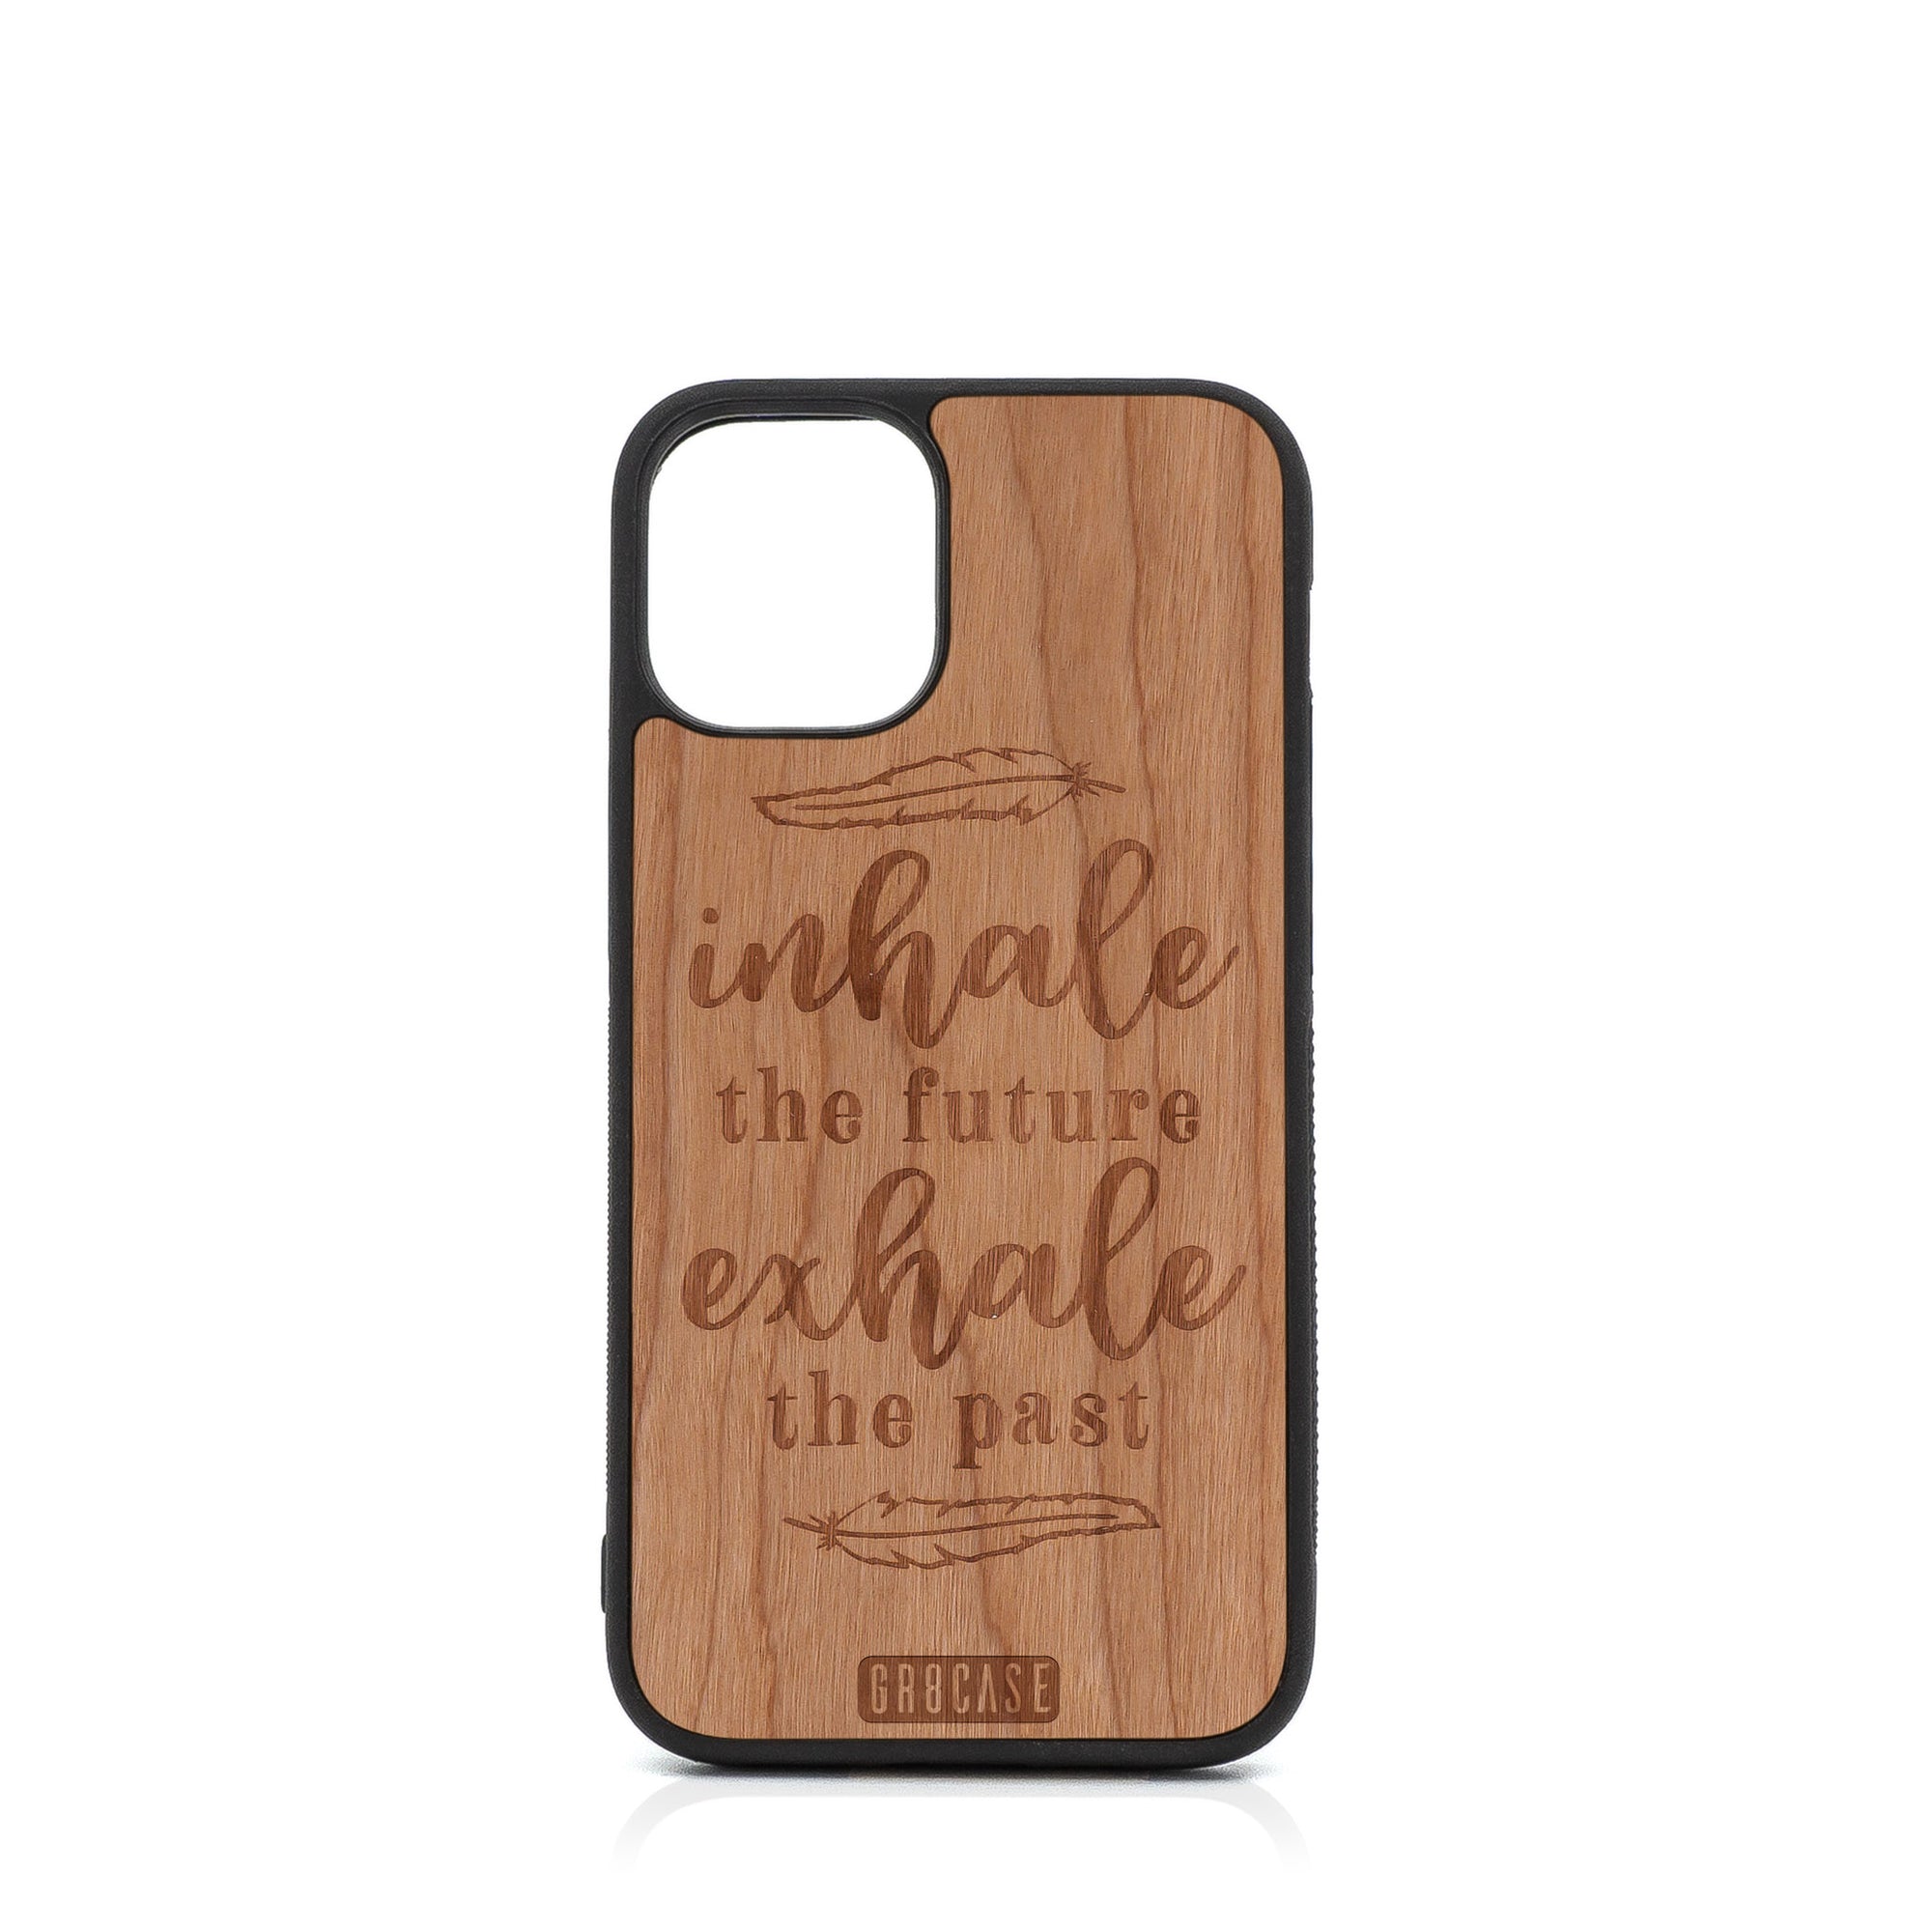 Inhale The Future Exhale The Past Design Wood Case For iPhone 12 Mini